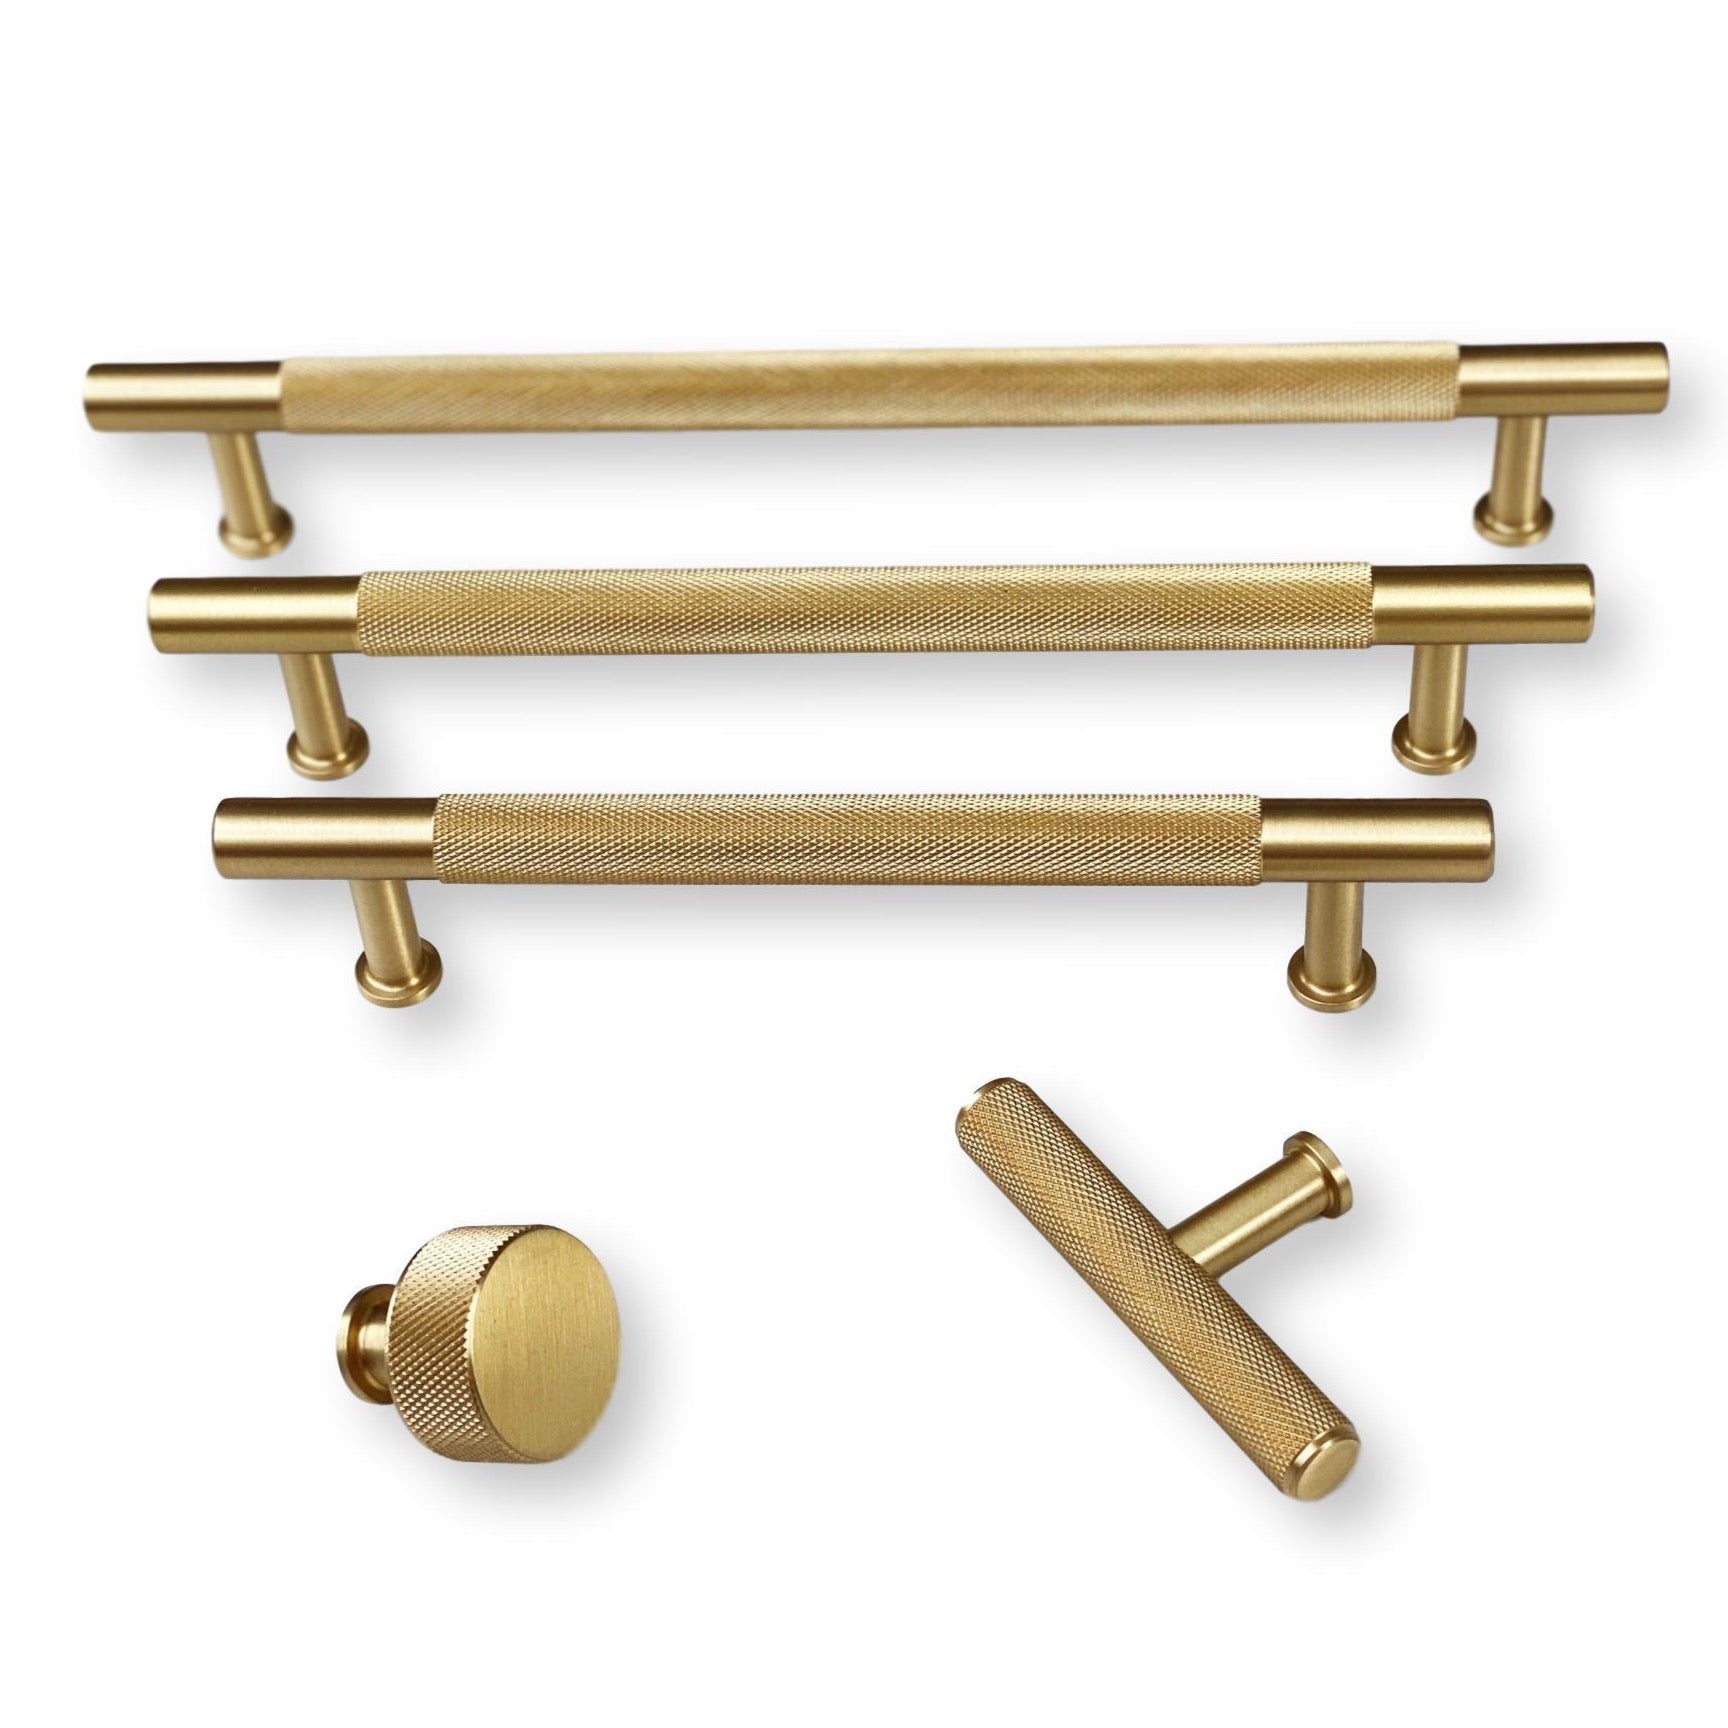 Brass Solid "Texture No.2" Knurled Drawer Pulls and Knobs in Satin Bra